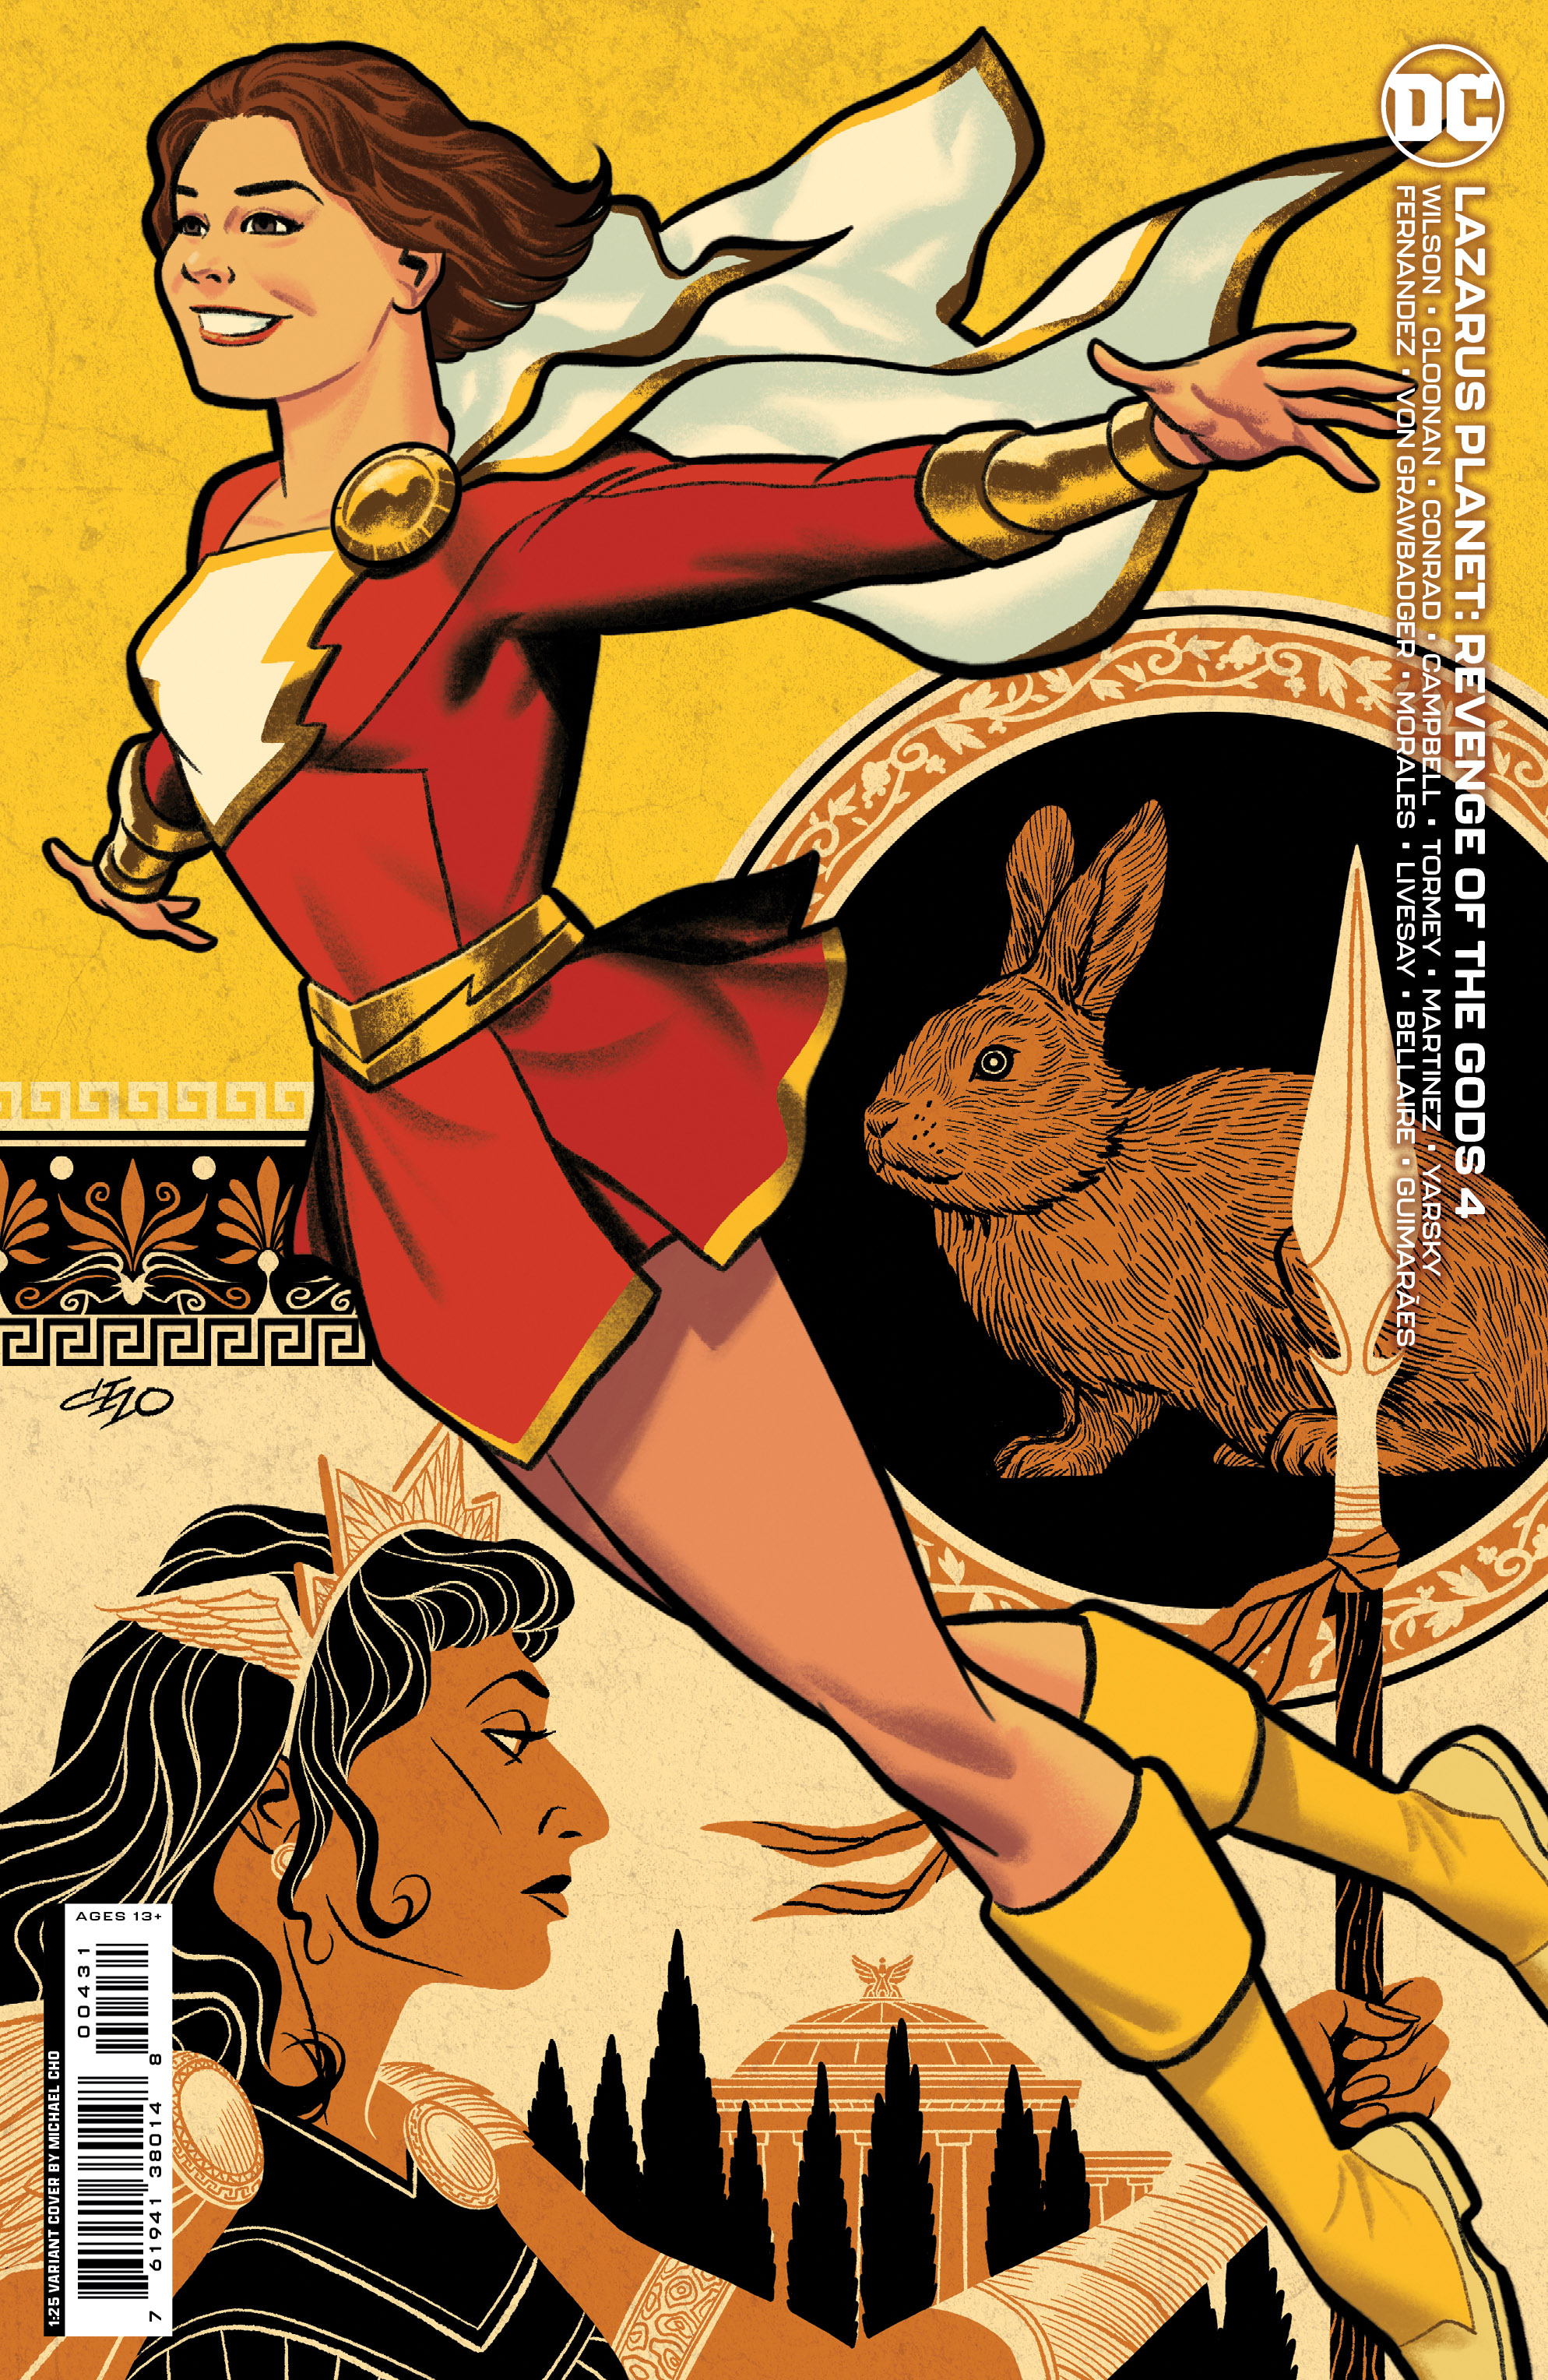 Lazarus Planet Revenge of the Gods #4 Cover C 1 for 25 Incentive Michael Cho Card Stock Variant (Of 4)